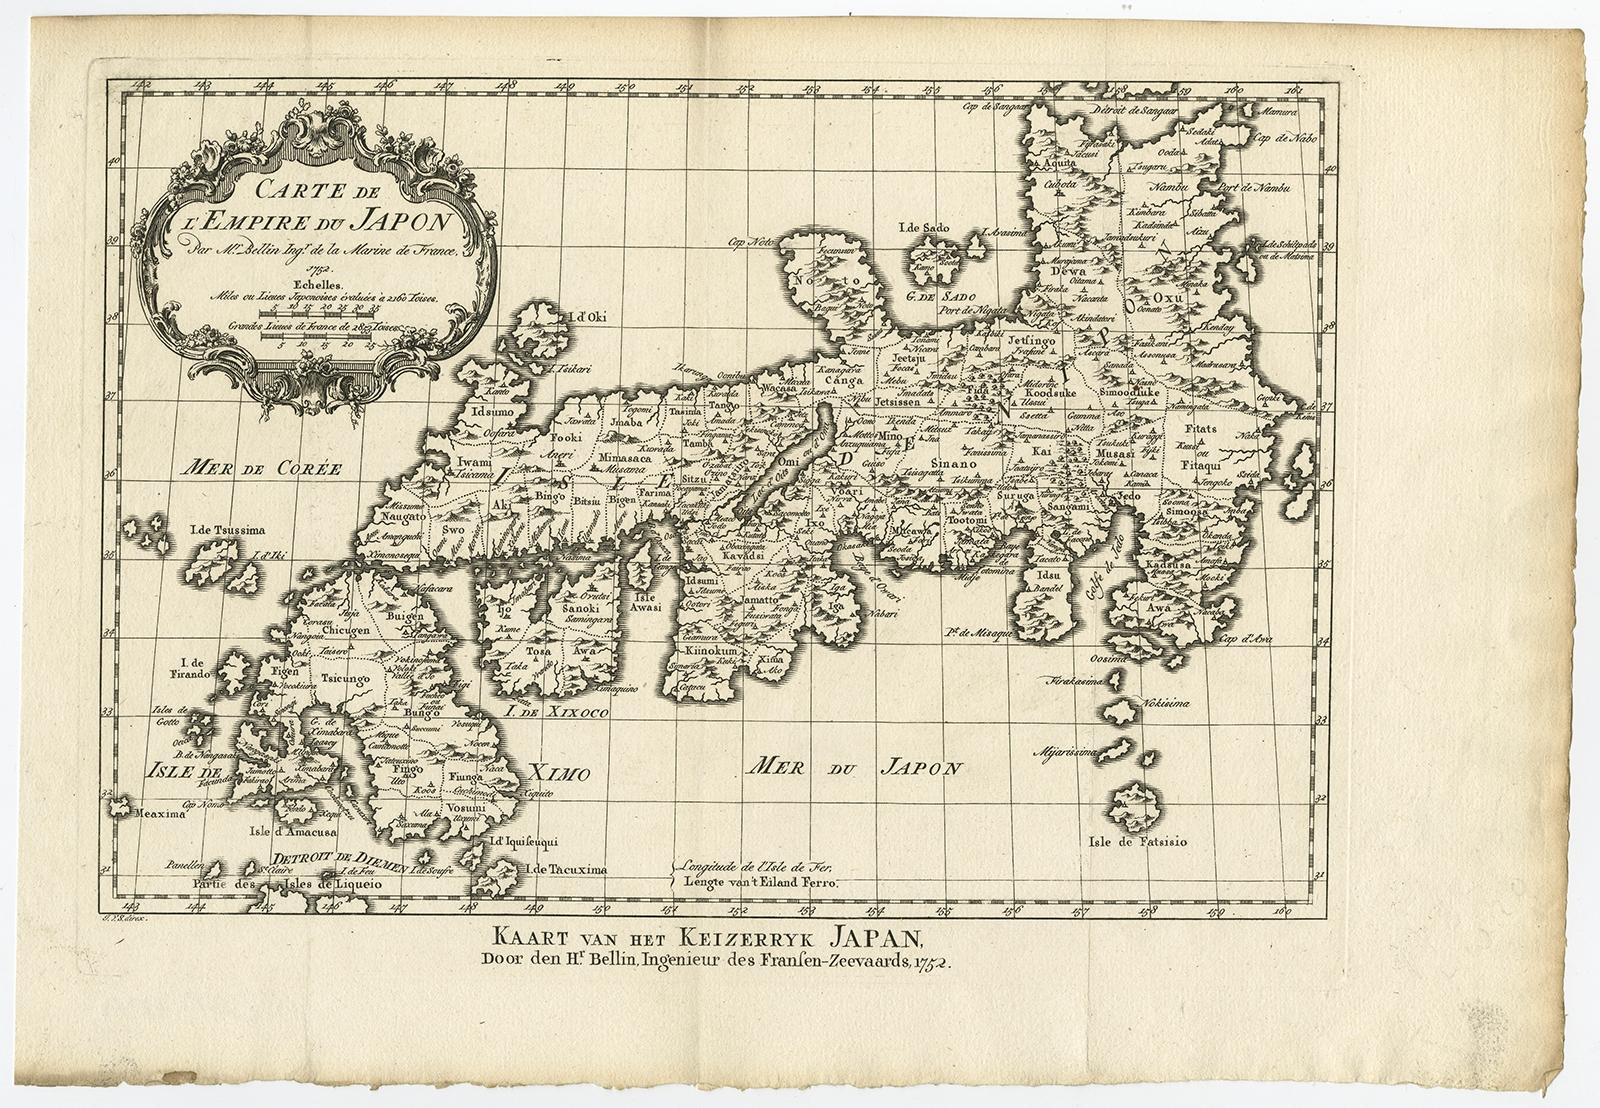 Antique map titled 'Carte de L'Empire de Japon (..).' 

Map of the Empire of Japan. Centered on the Bay of Osaka, this map covers from Hirado (here identified as I. Firando) and Nagasaki to Akita (Aquita), to include most of Tokugawa (Edo) Era